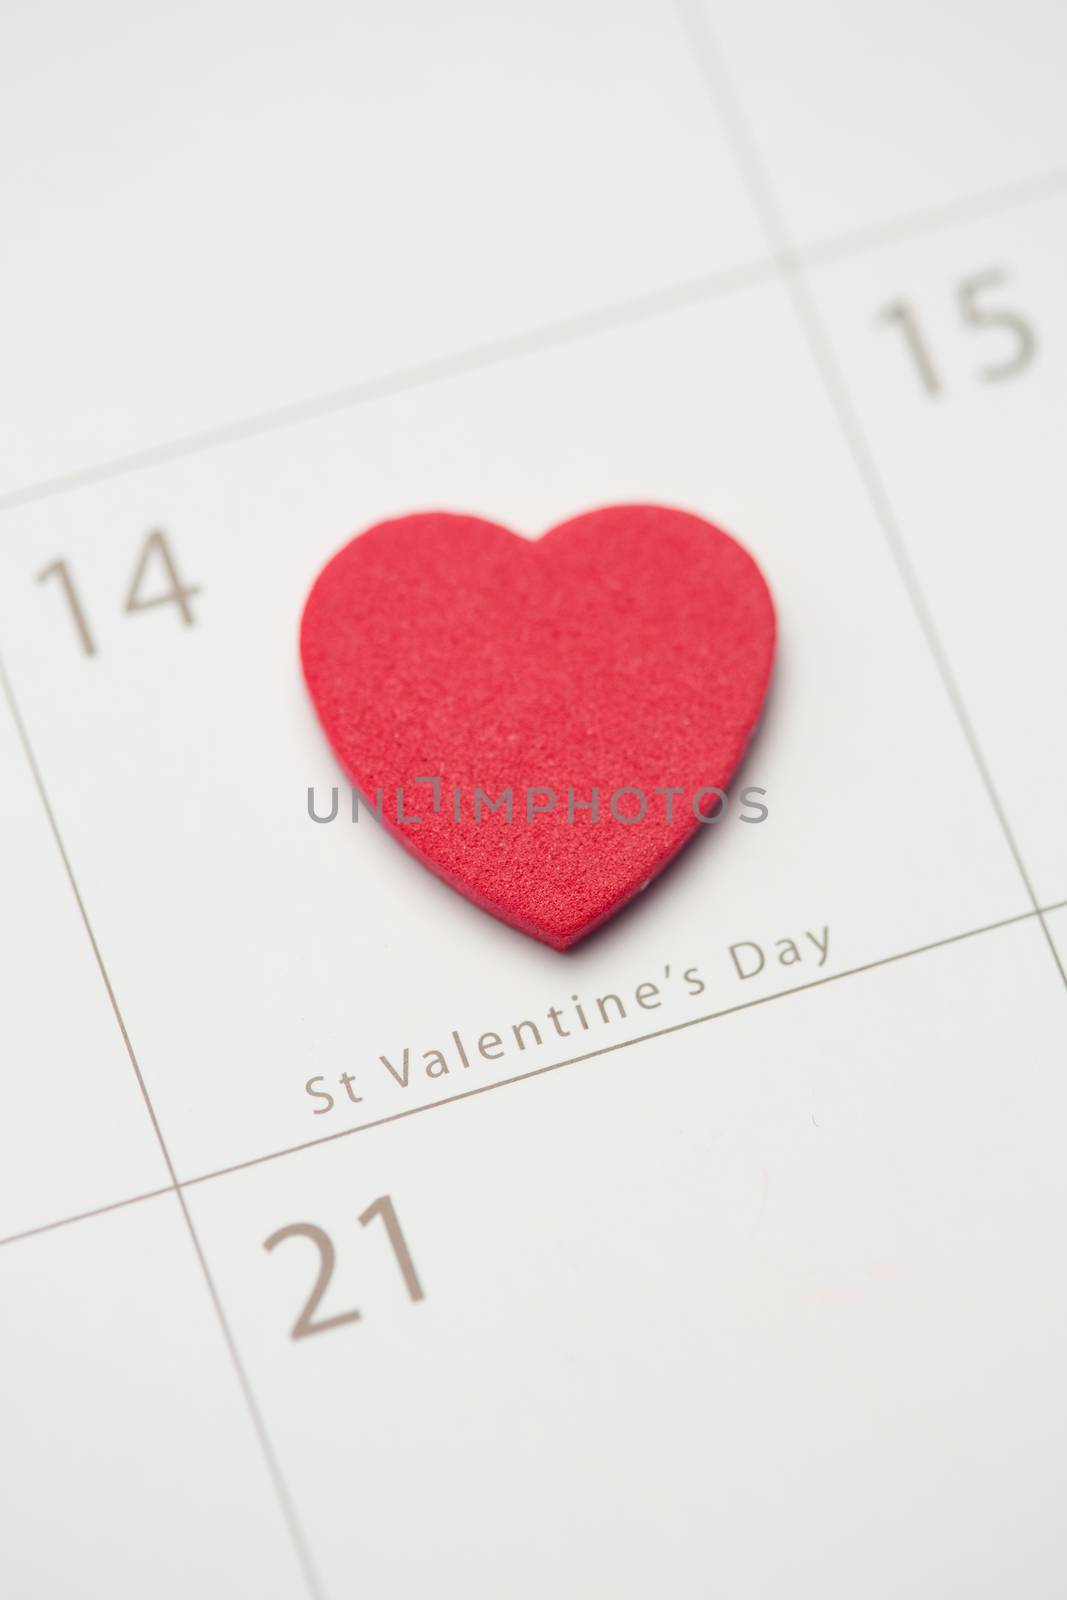 Zoom on pink heart marking valentines day on calendar